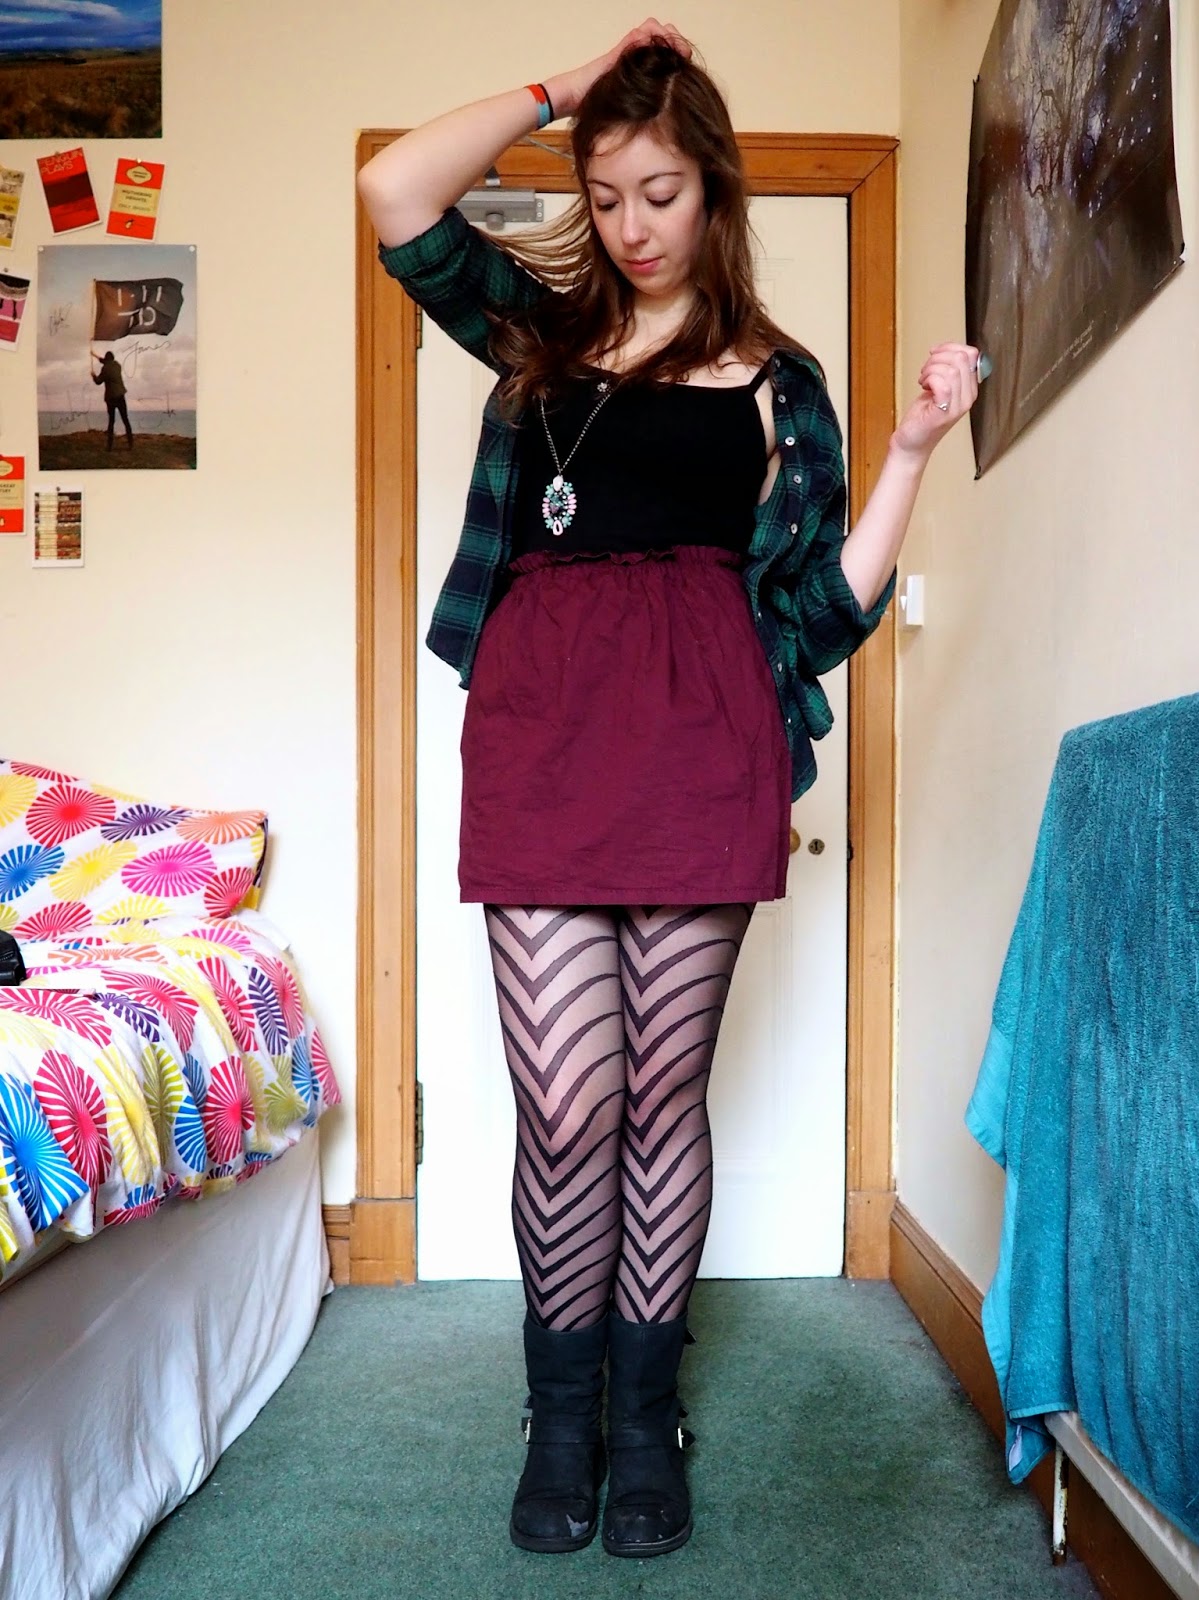 Statement pieces outfit | Green checked shirt, black vest, purple skirt, patterned tights & black biker boots